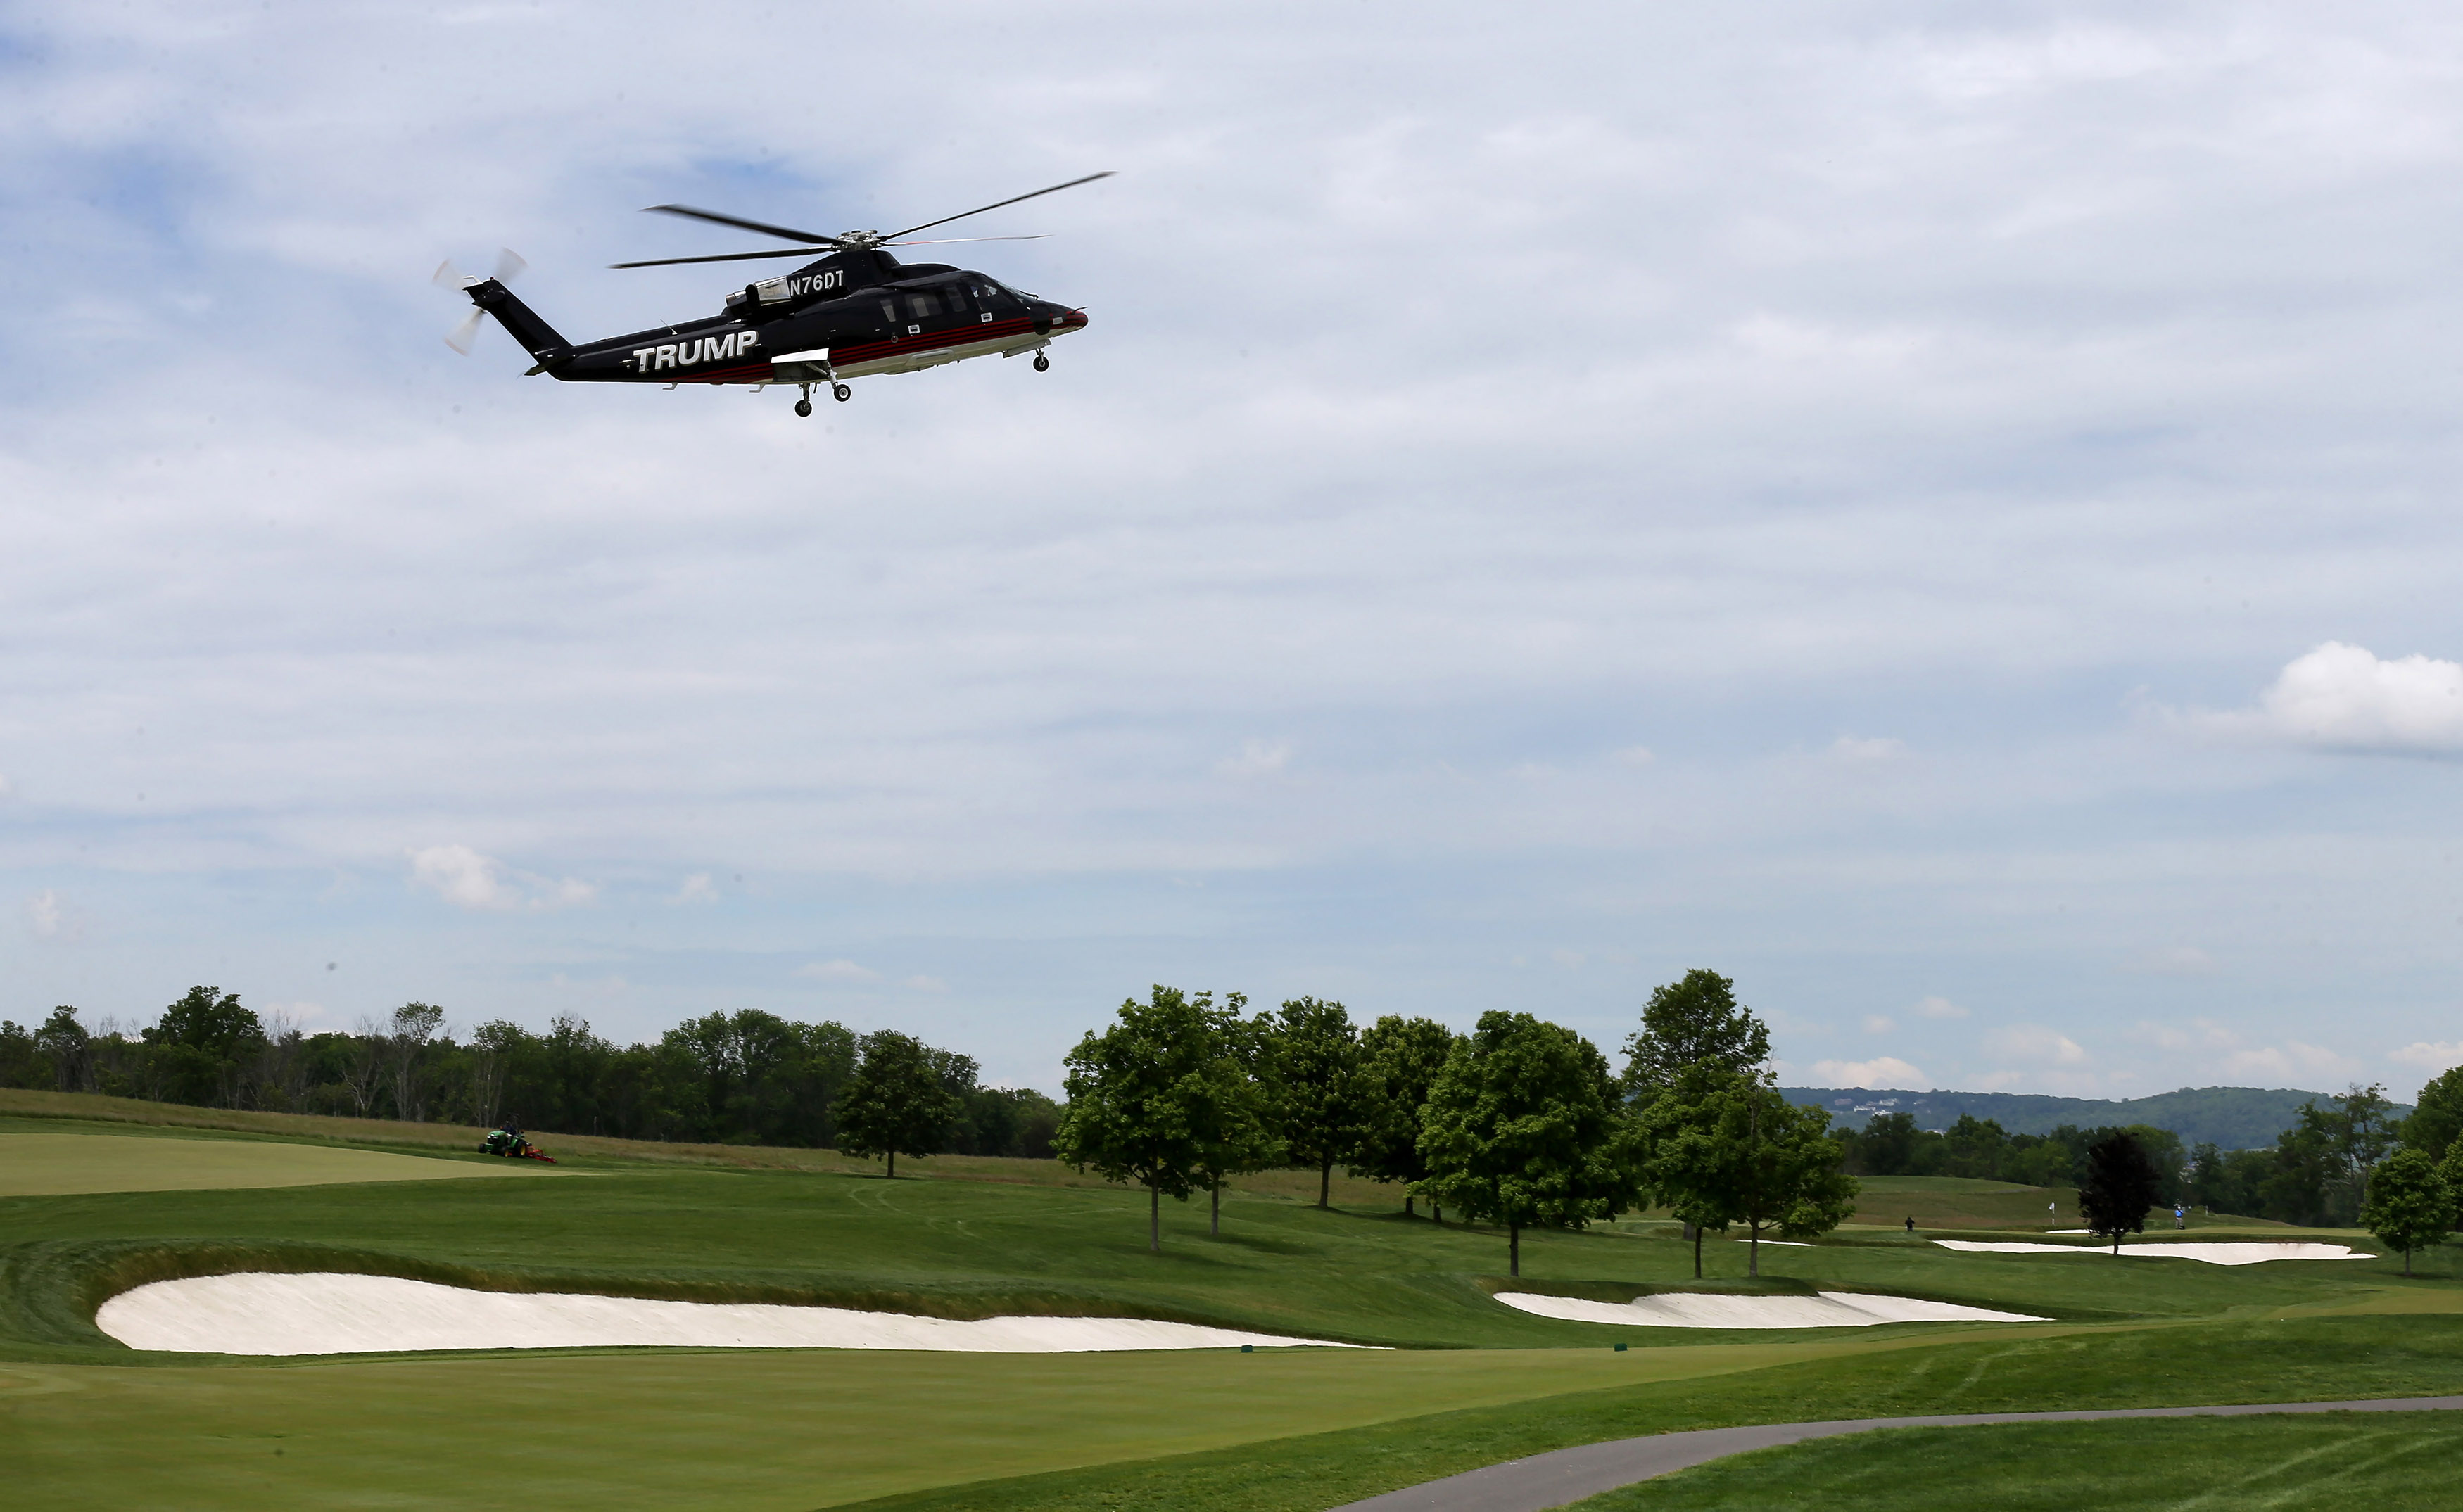 A Trump helicopter arrives at Trump National Golf Club in Bedminster, New Jersey.  President Donald Trump has frequent stays in Bedminster, bringing with him presidential temporary flight restrictions. Too many pilots have violated the TFRs, and aviation groups are working to inform pilots to be more careful. Photo courtesy of John Munson, NJ Advance Media.